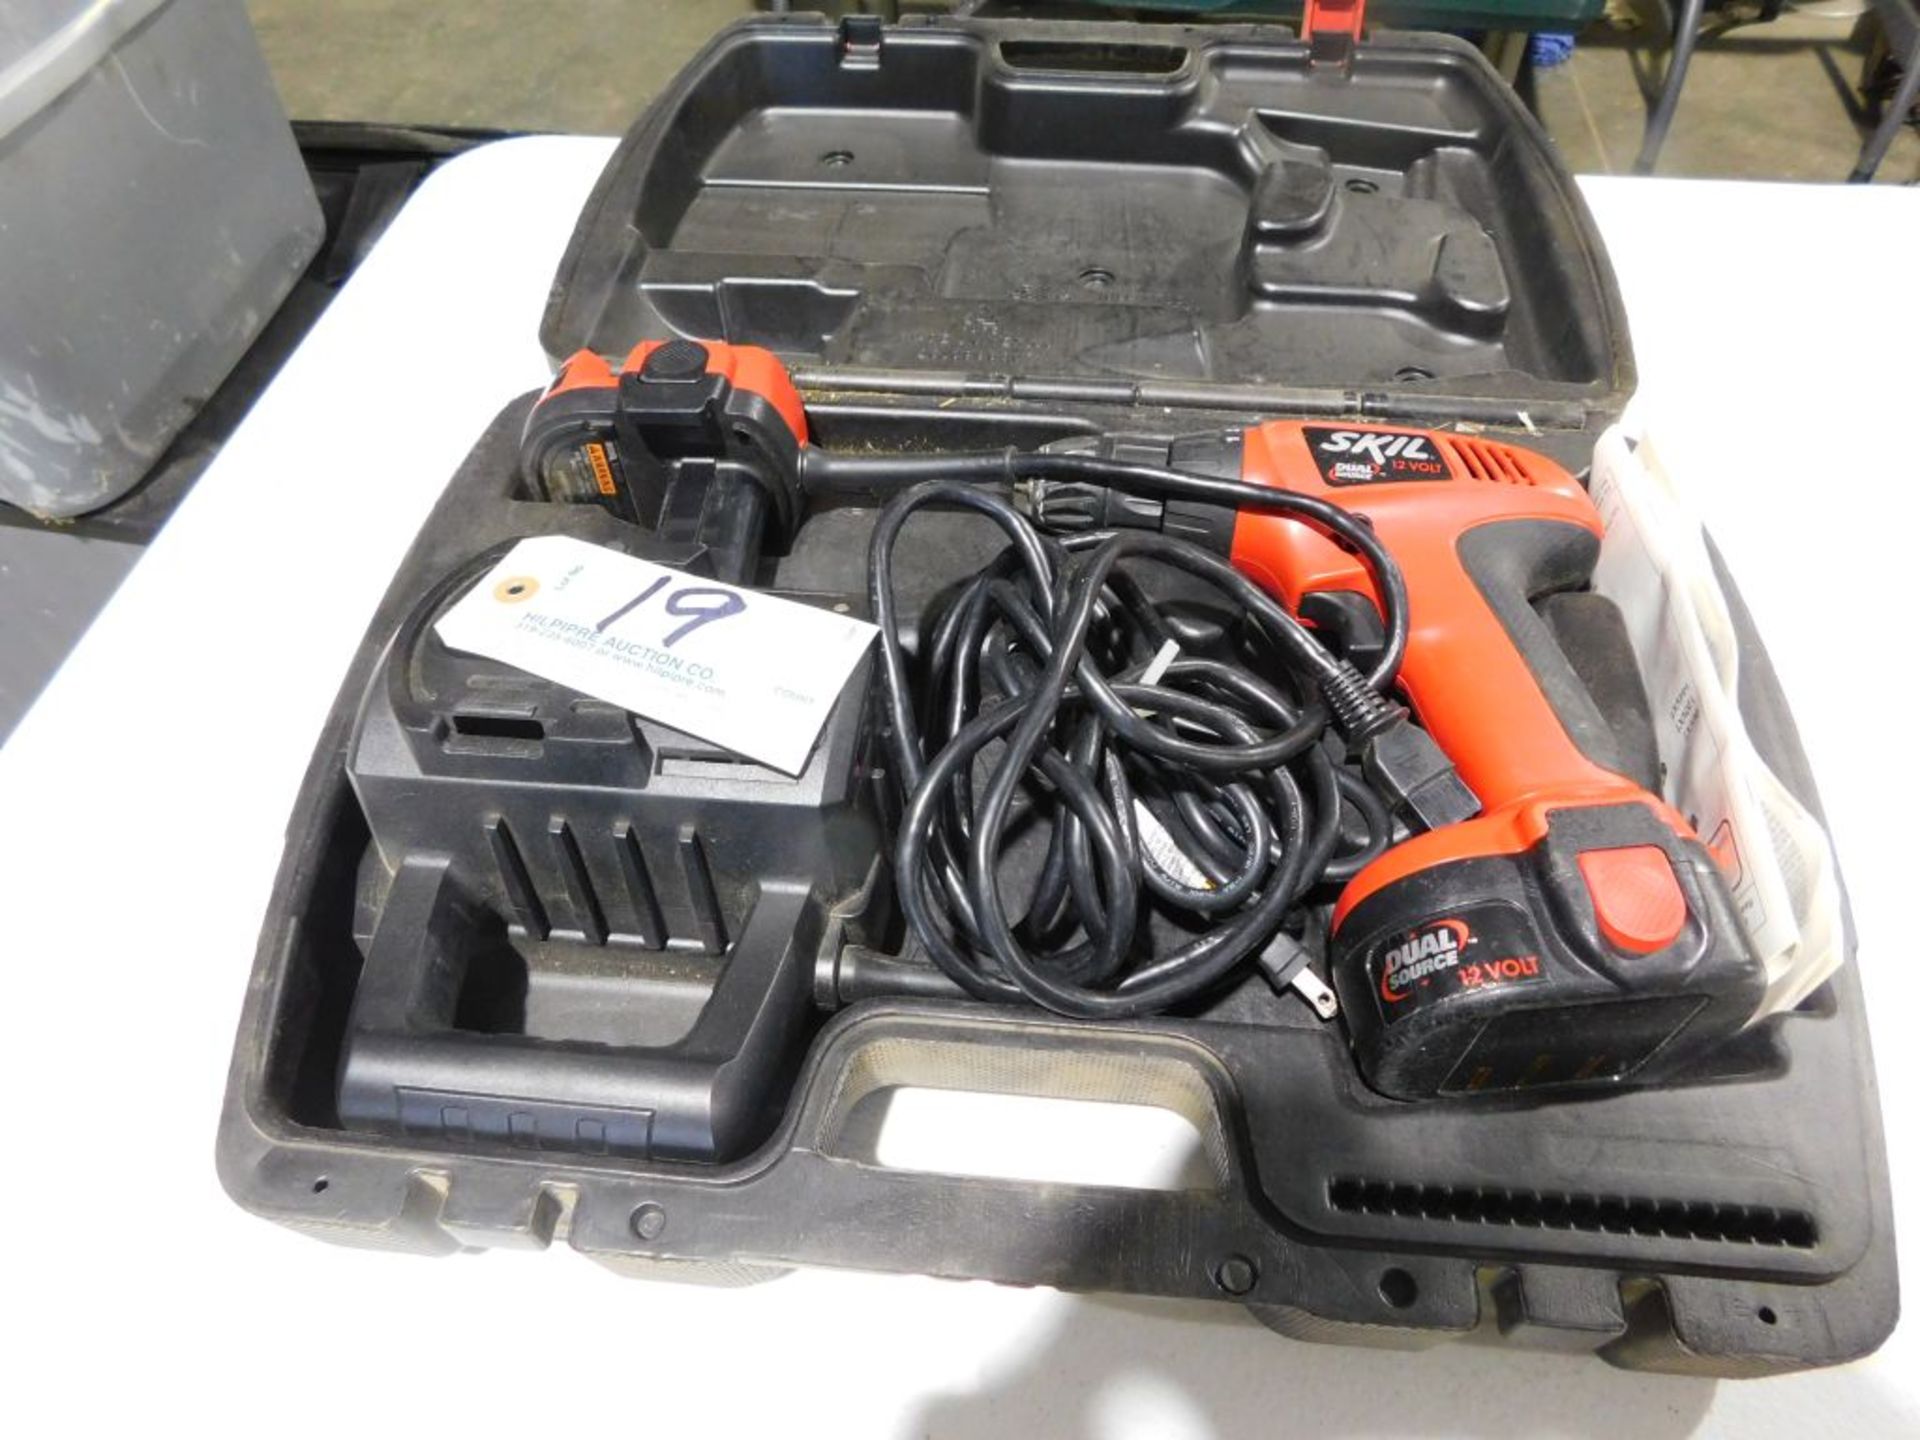 Skil electric drill, 12 v. (Located at and to be picked up at: 2862 Wagner Rd., Waterloo, IA)